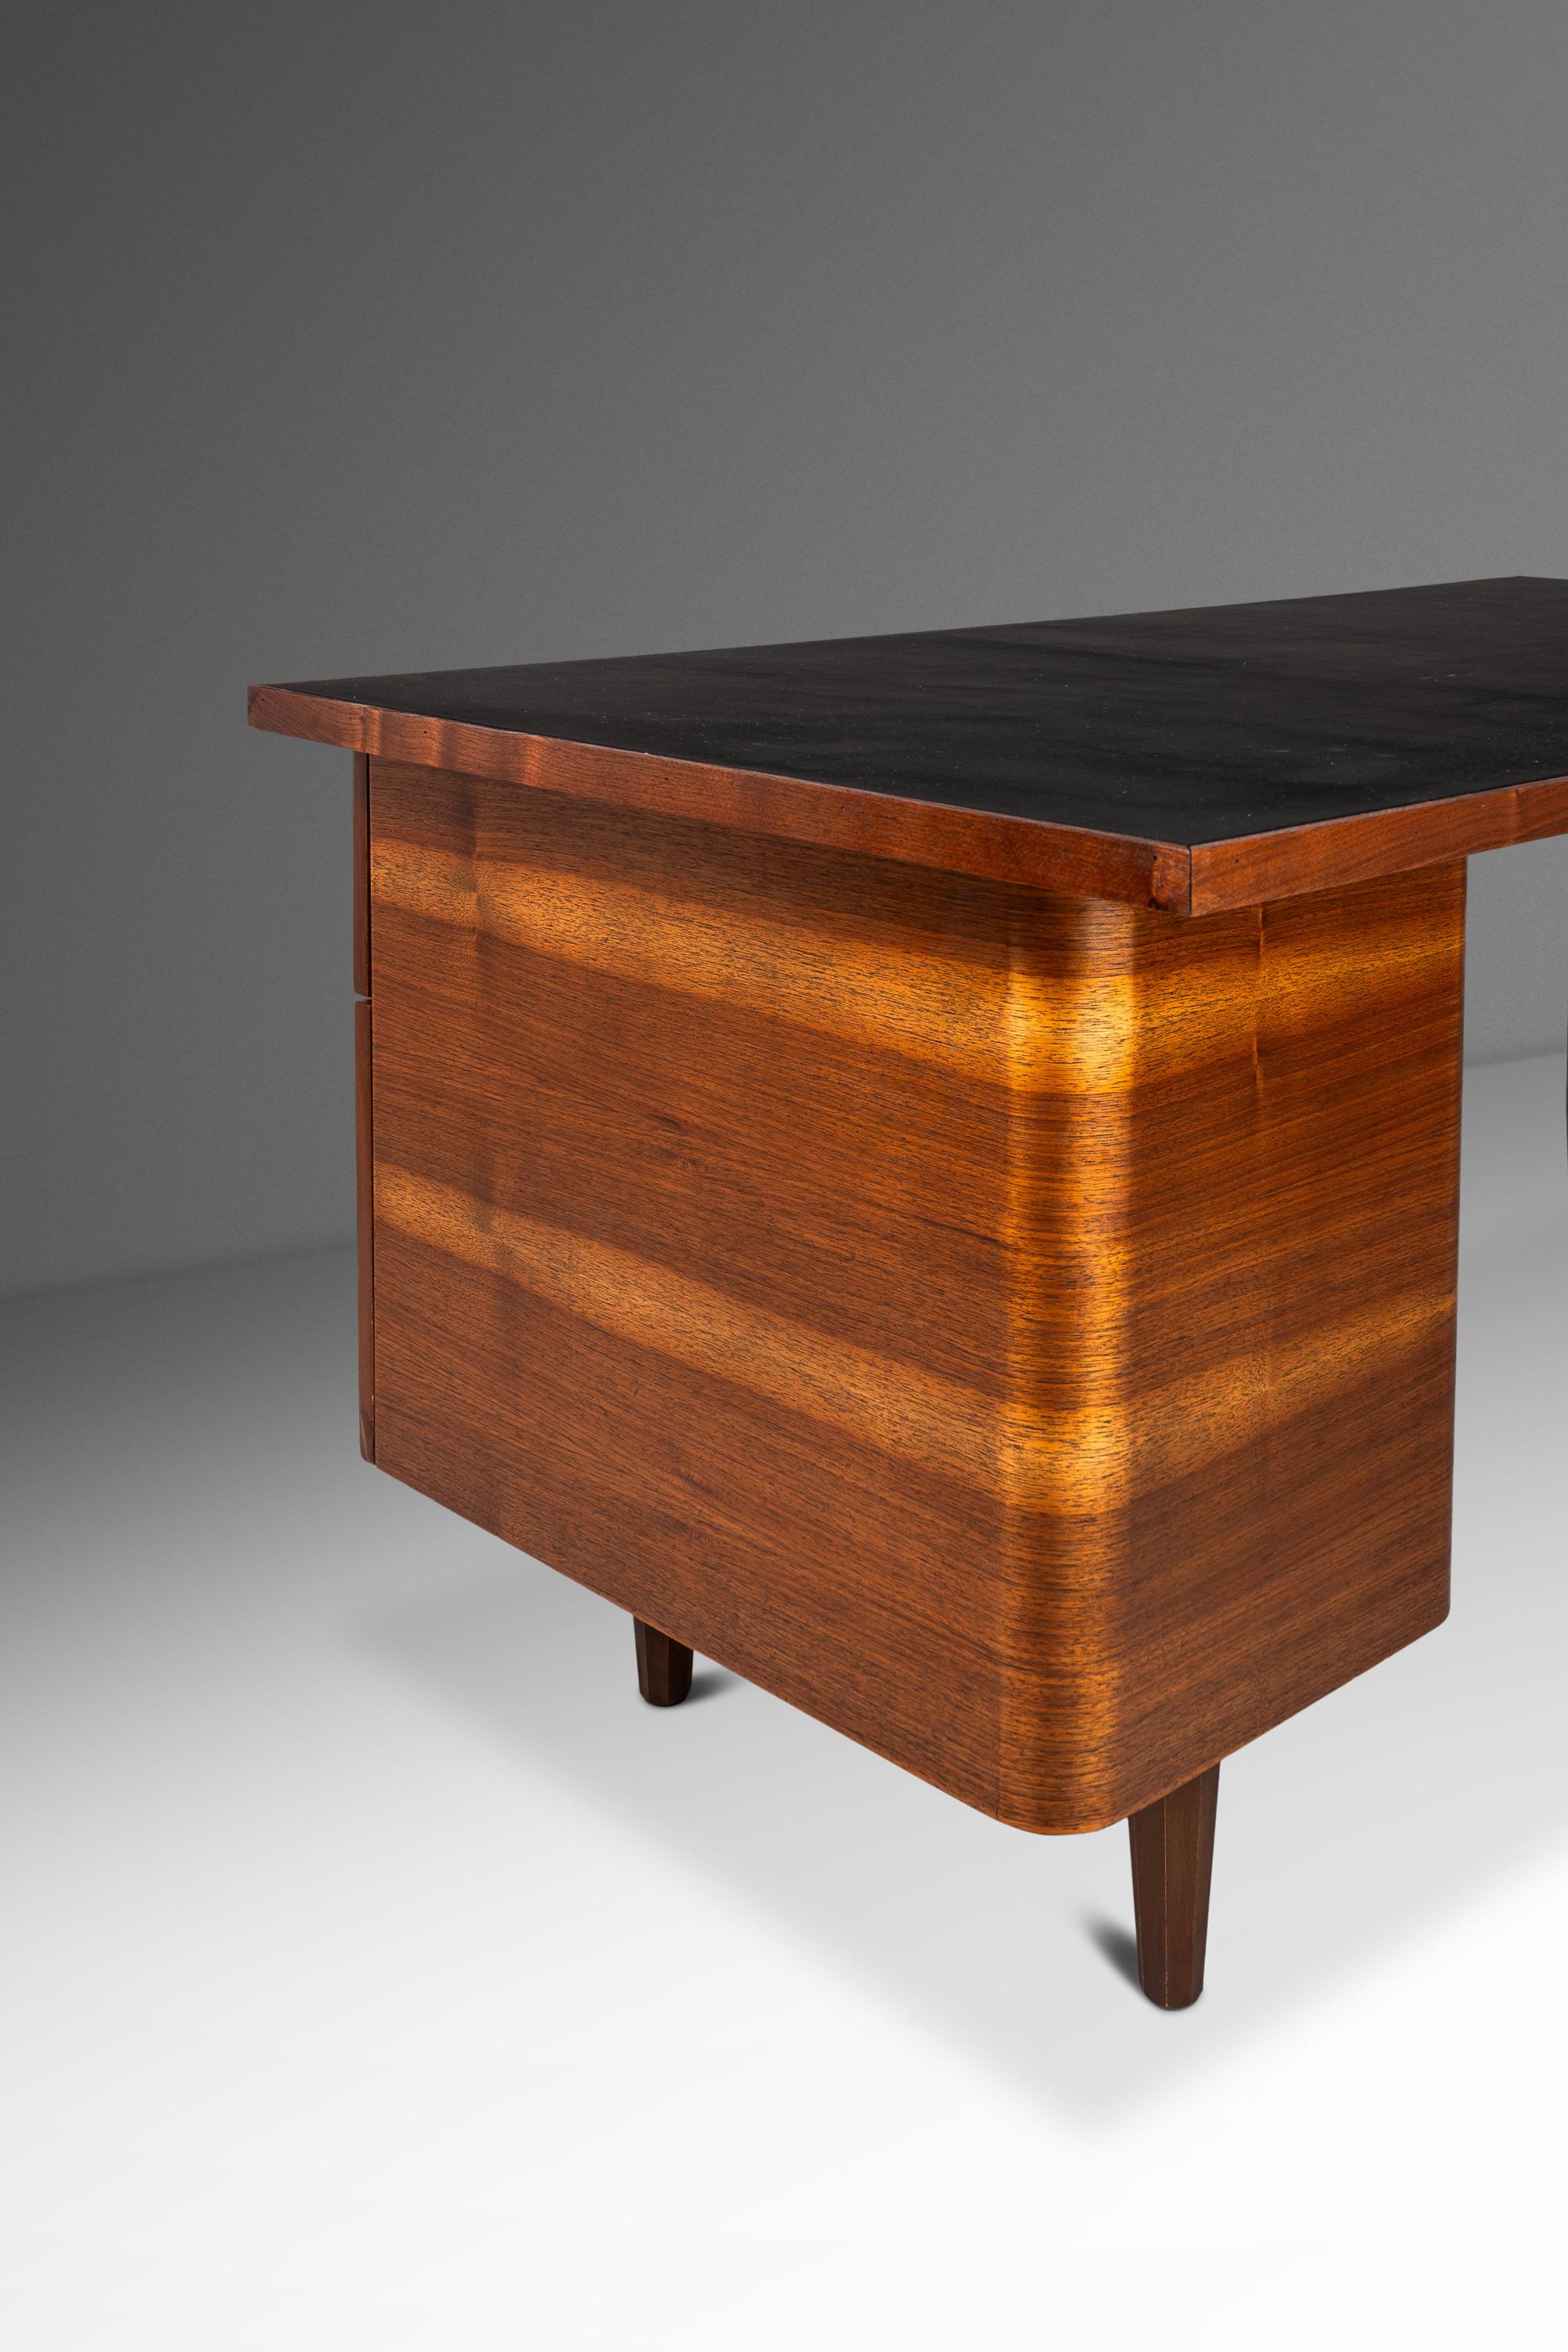 Restored Mid-Century Modern Writers Desk in Walnut with Leather Top, USA, 1960's For Sale 1